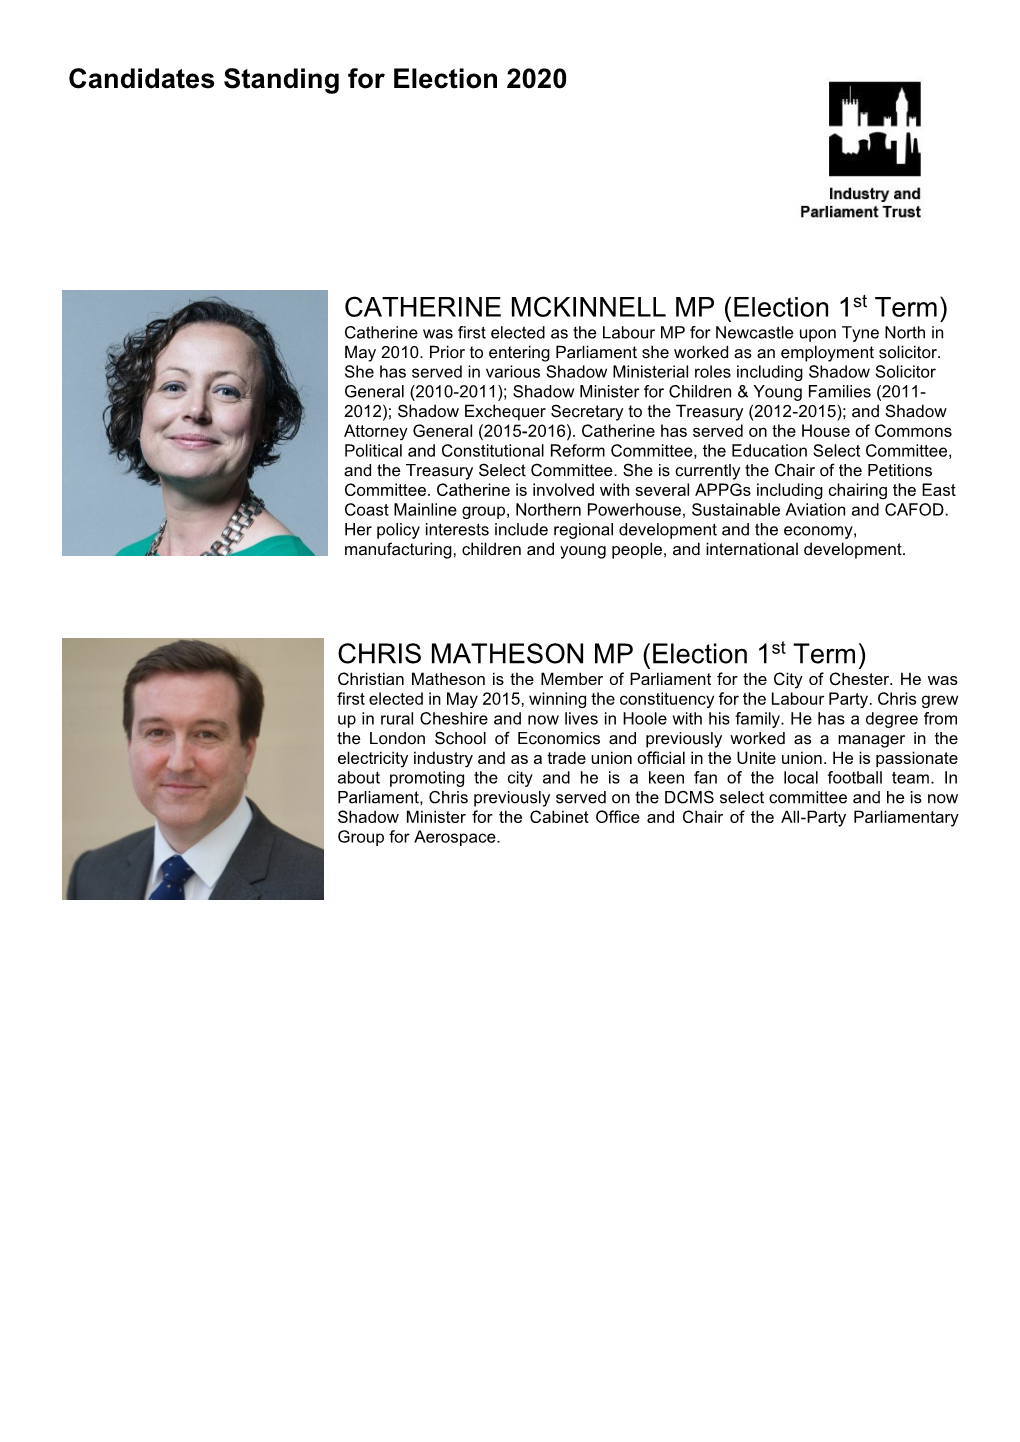 Candidates Standing for Election 2020 CATHERINE MCKINNELL MP